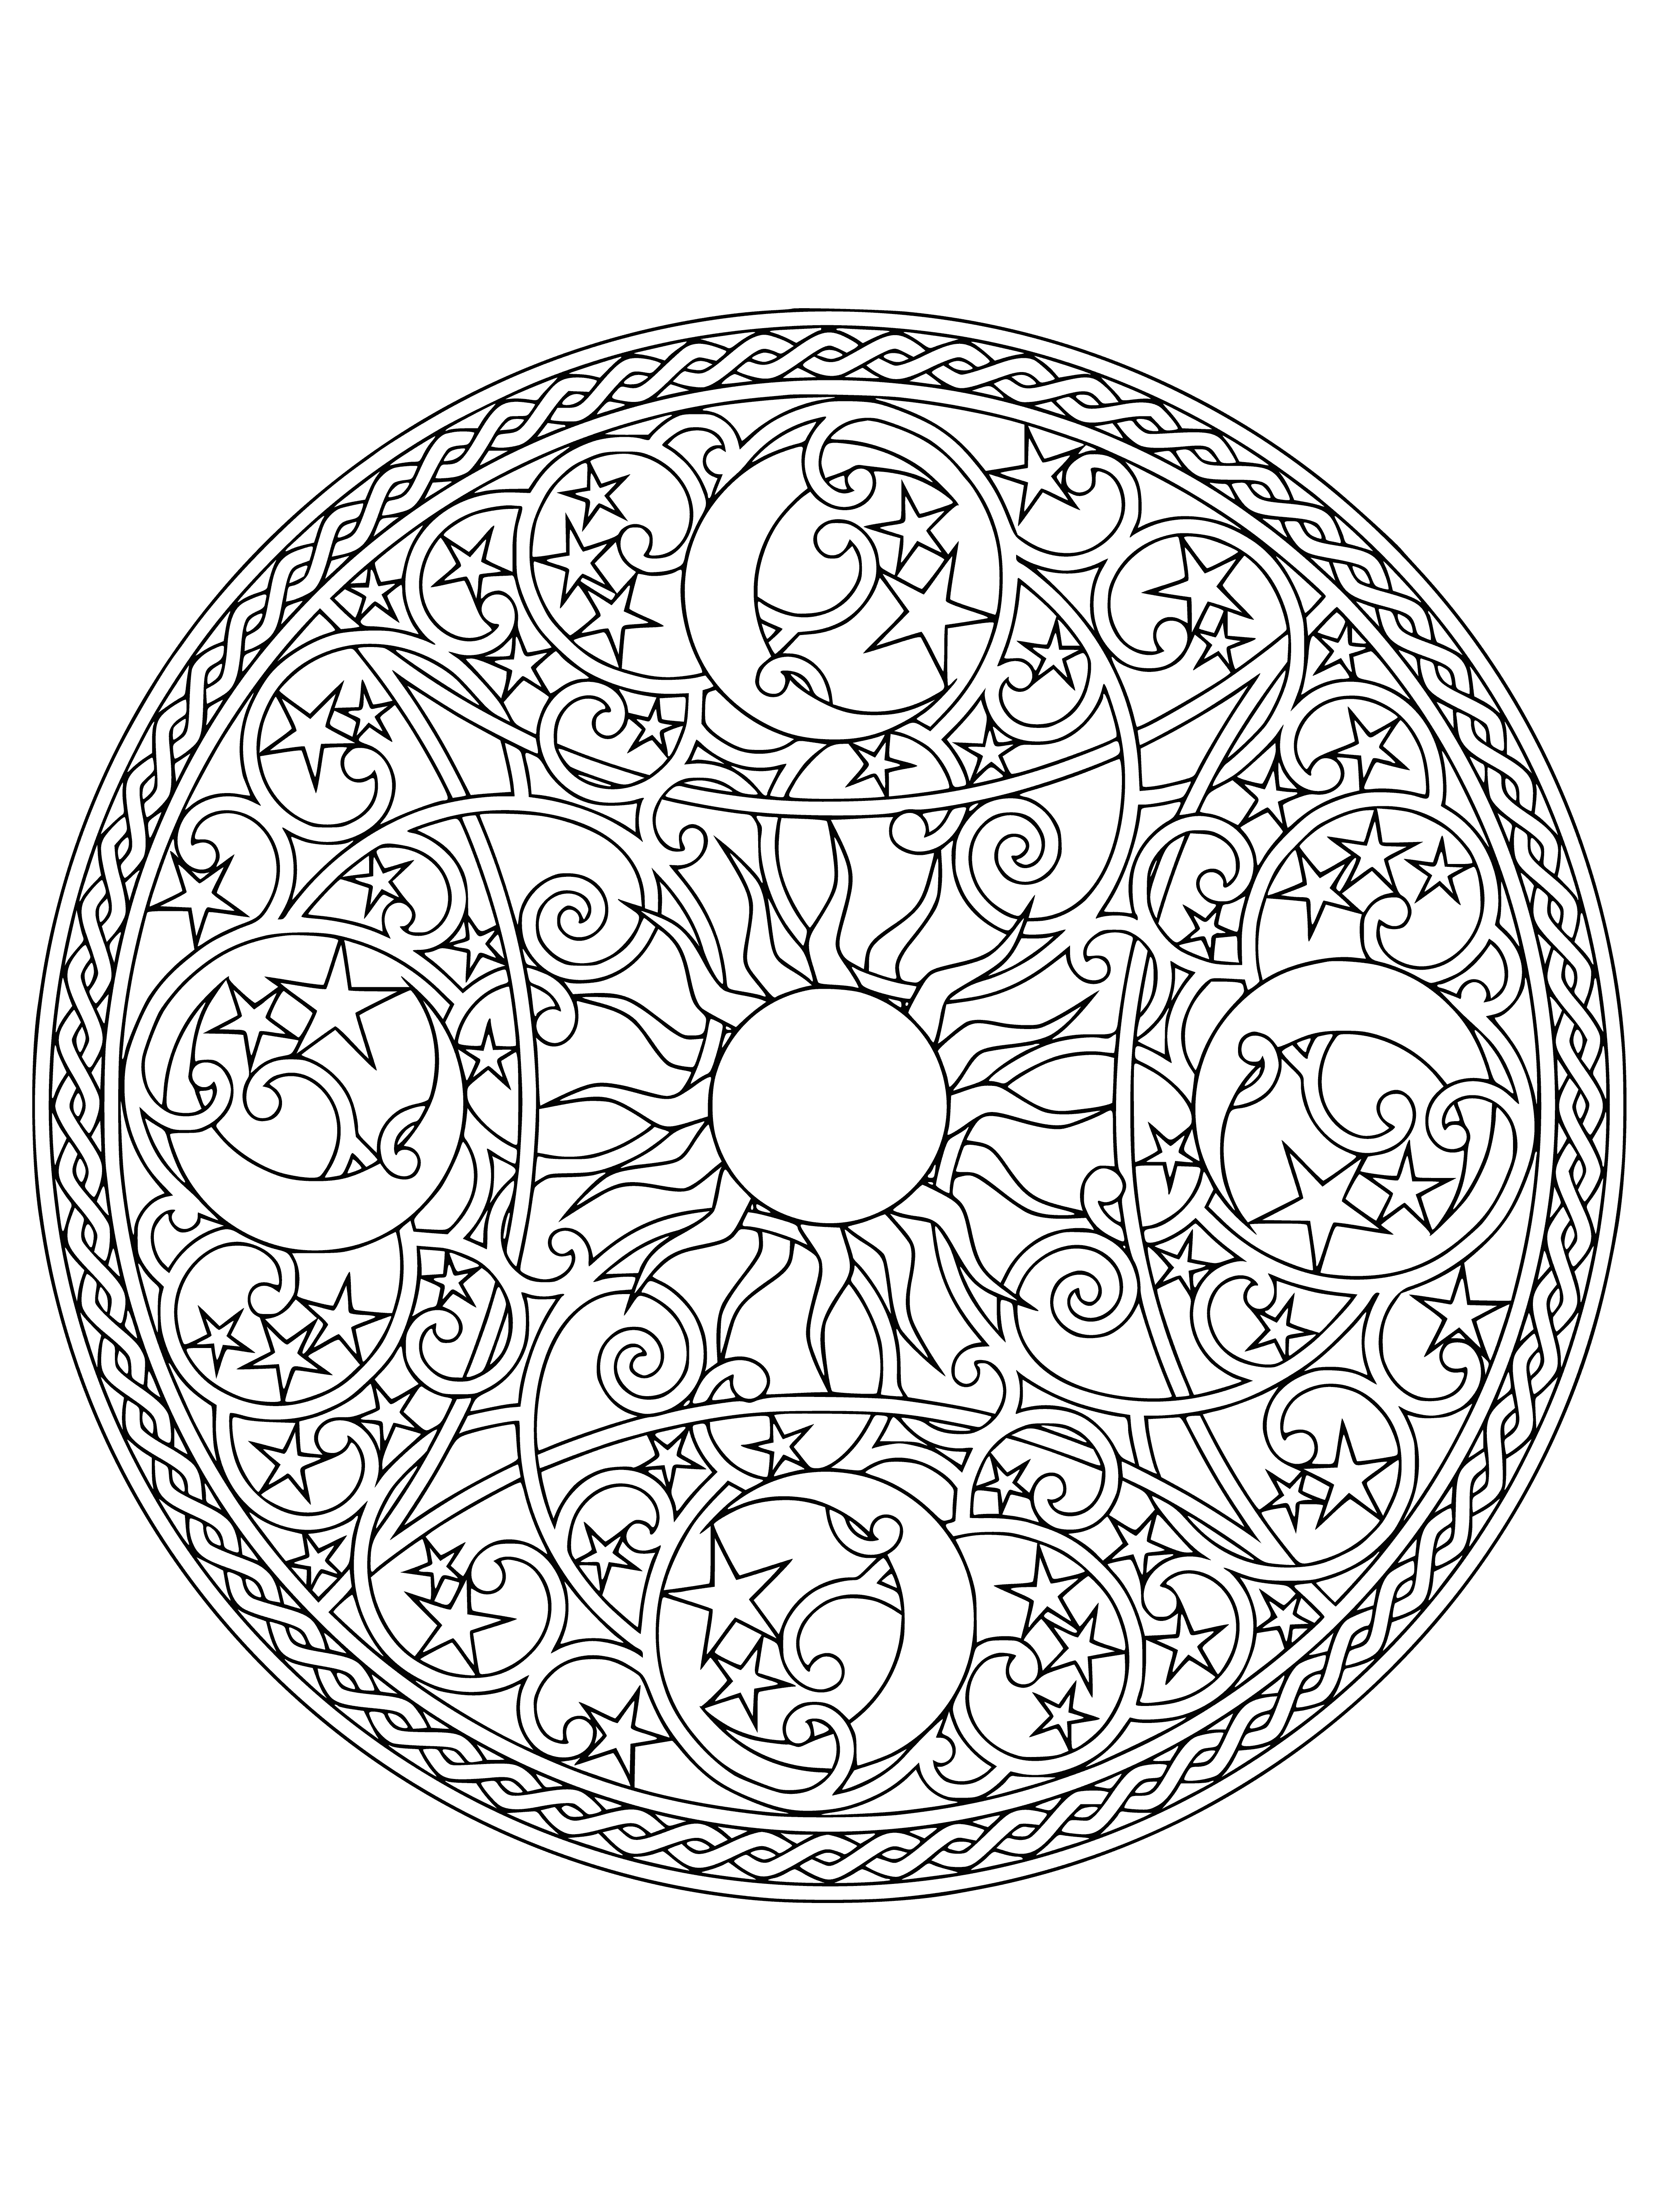 coloring page: Coloring page features a sun, moon, star, and geometric shapes connected by streamers of light.